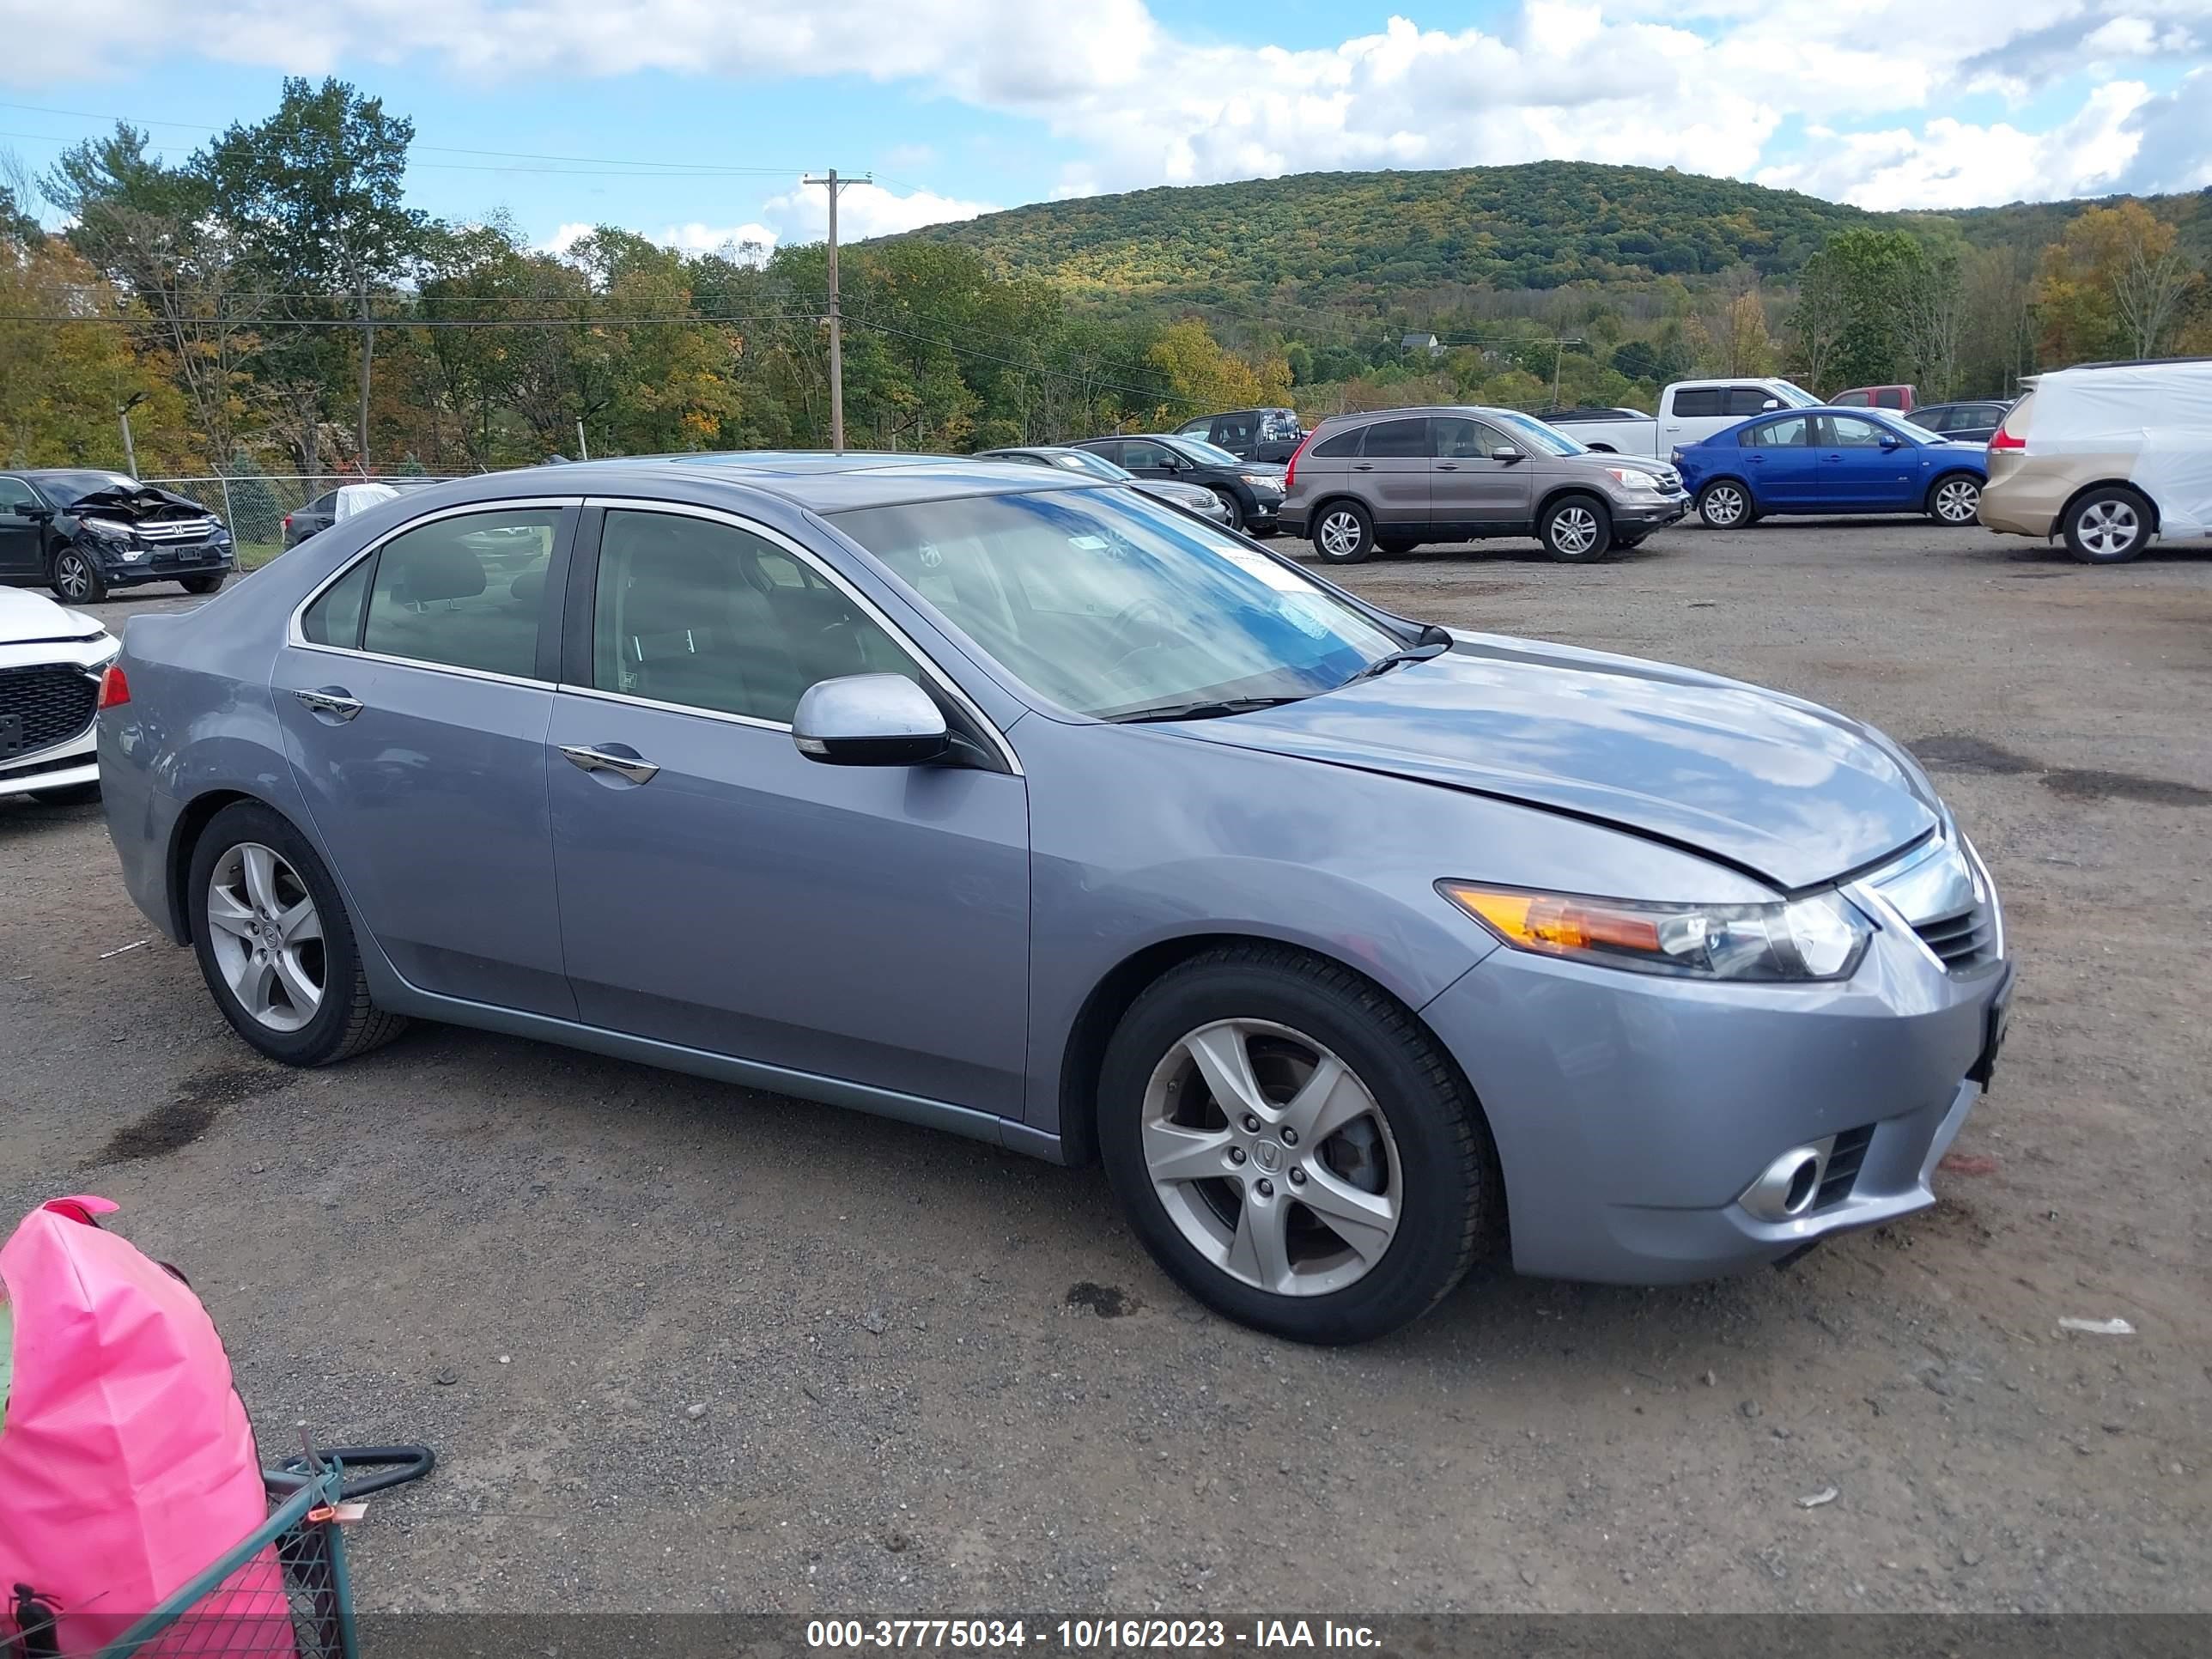 vin: JH4CU2F4XCC025805 JH4CU2F4XCC025805 2012 acura tsx 2400 for Sale in 07865, 985 State Route 57, Port Murray, New Jersey, USA